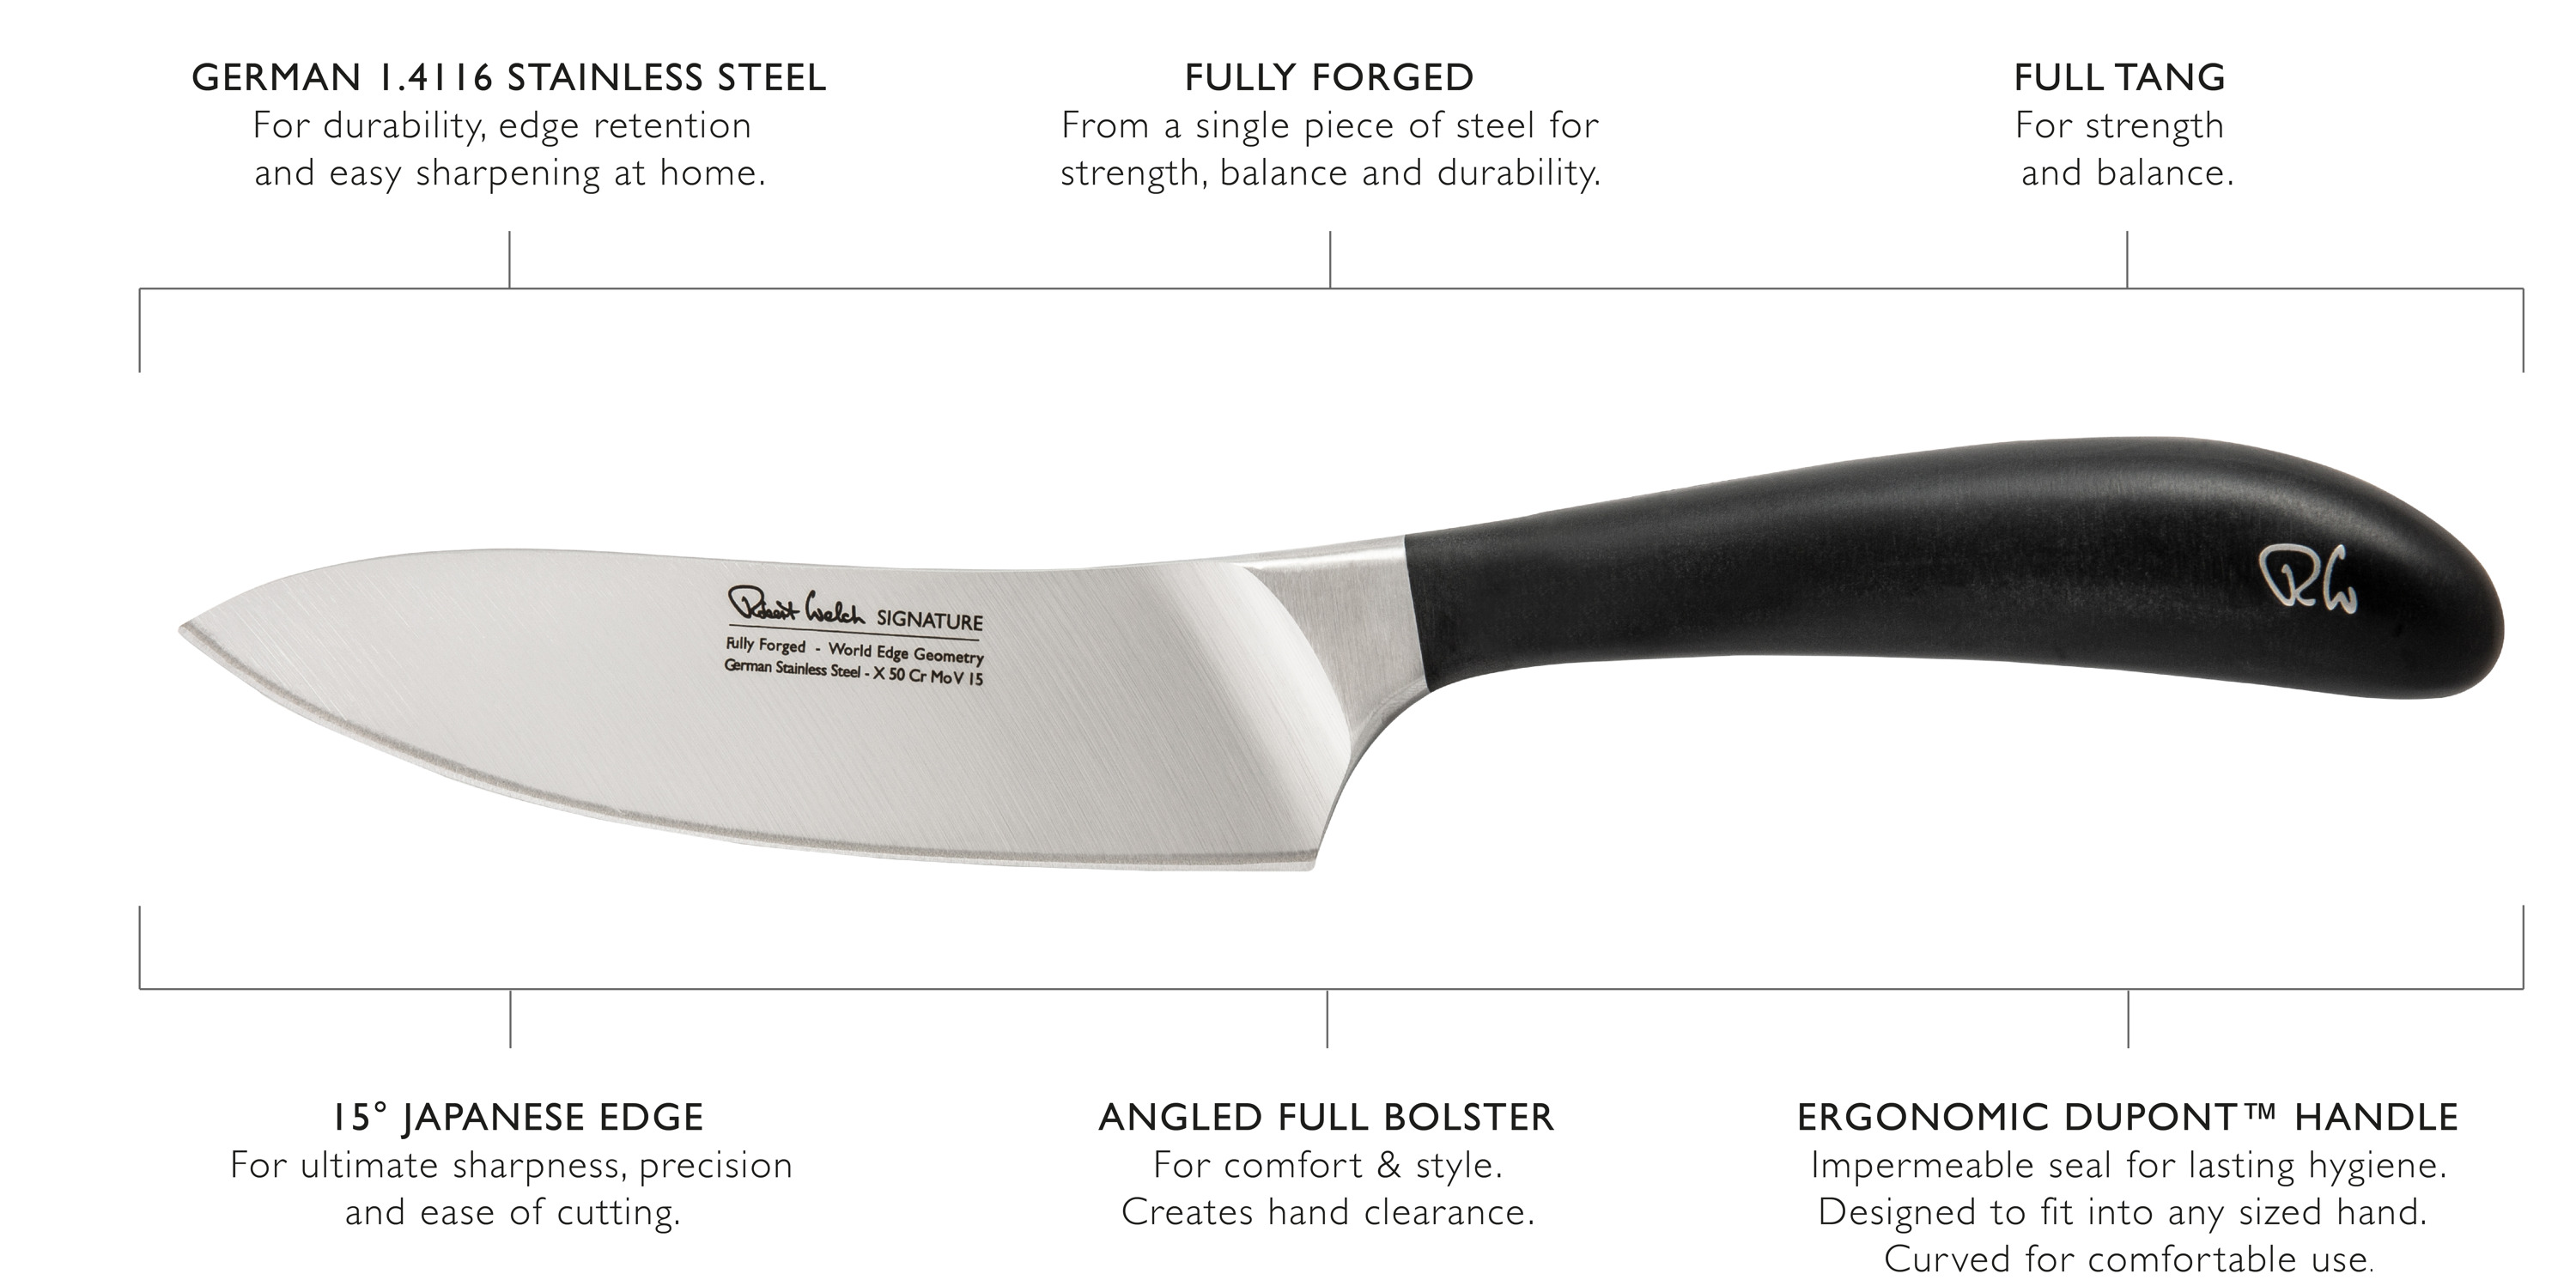 Signature Cook's Knives -endorsed as a Which? best buy